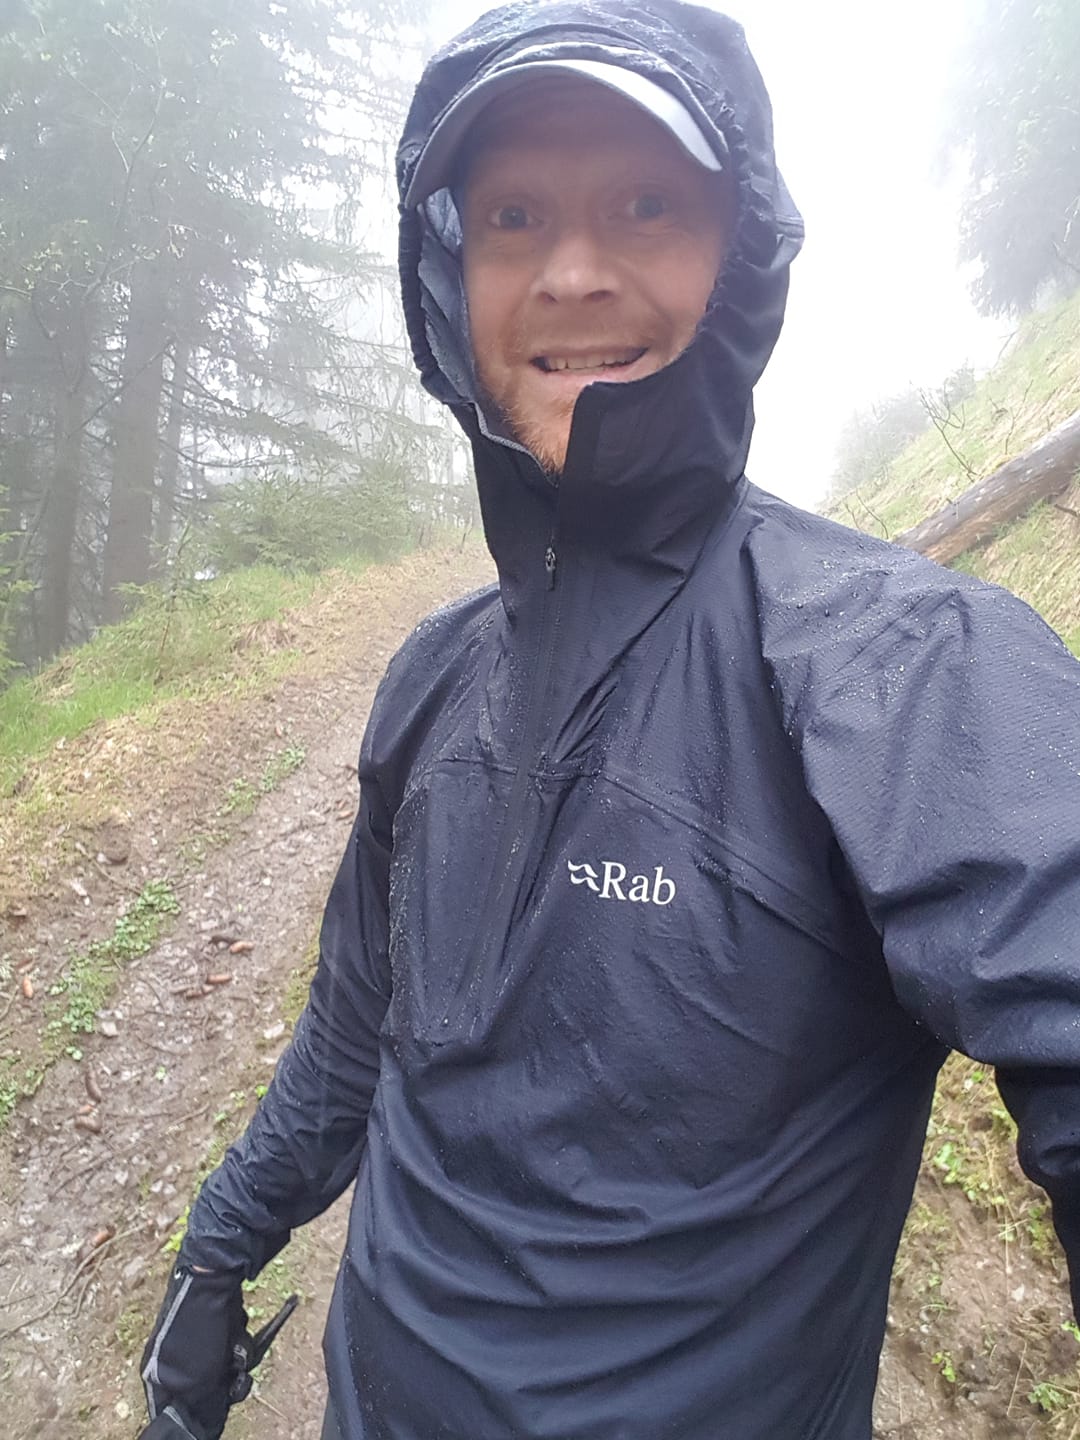 Review of the Rab Skyline range of clothing